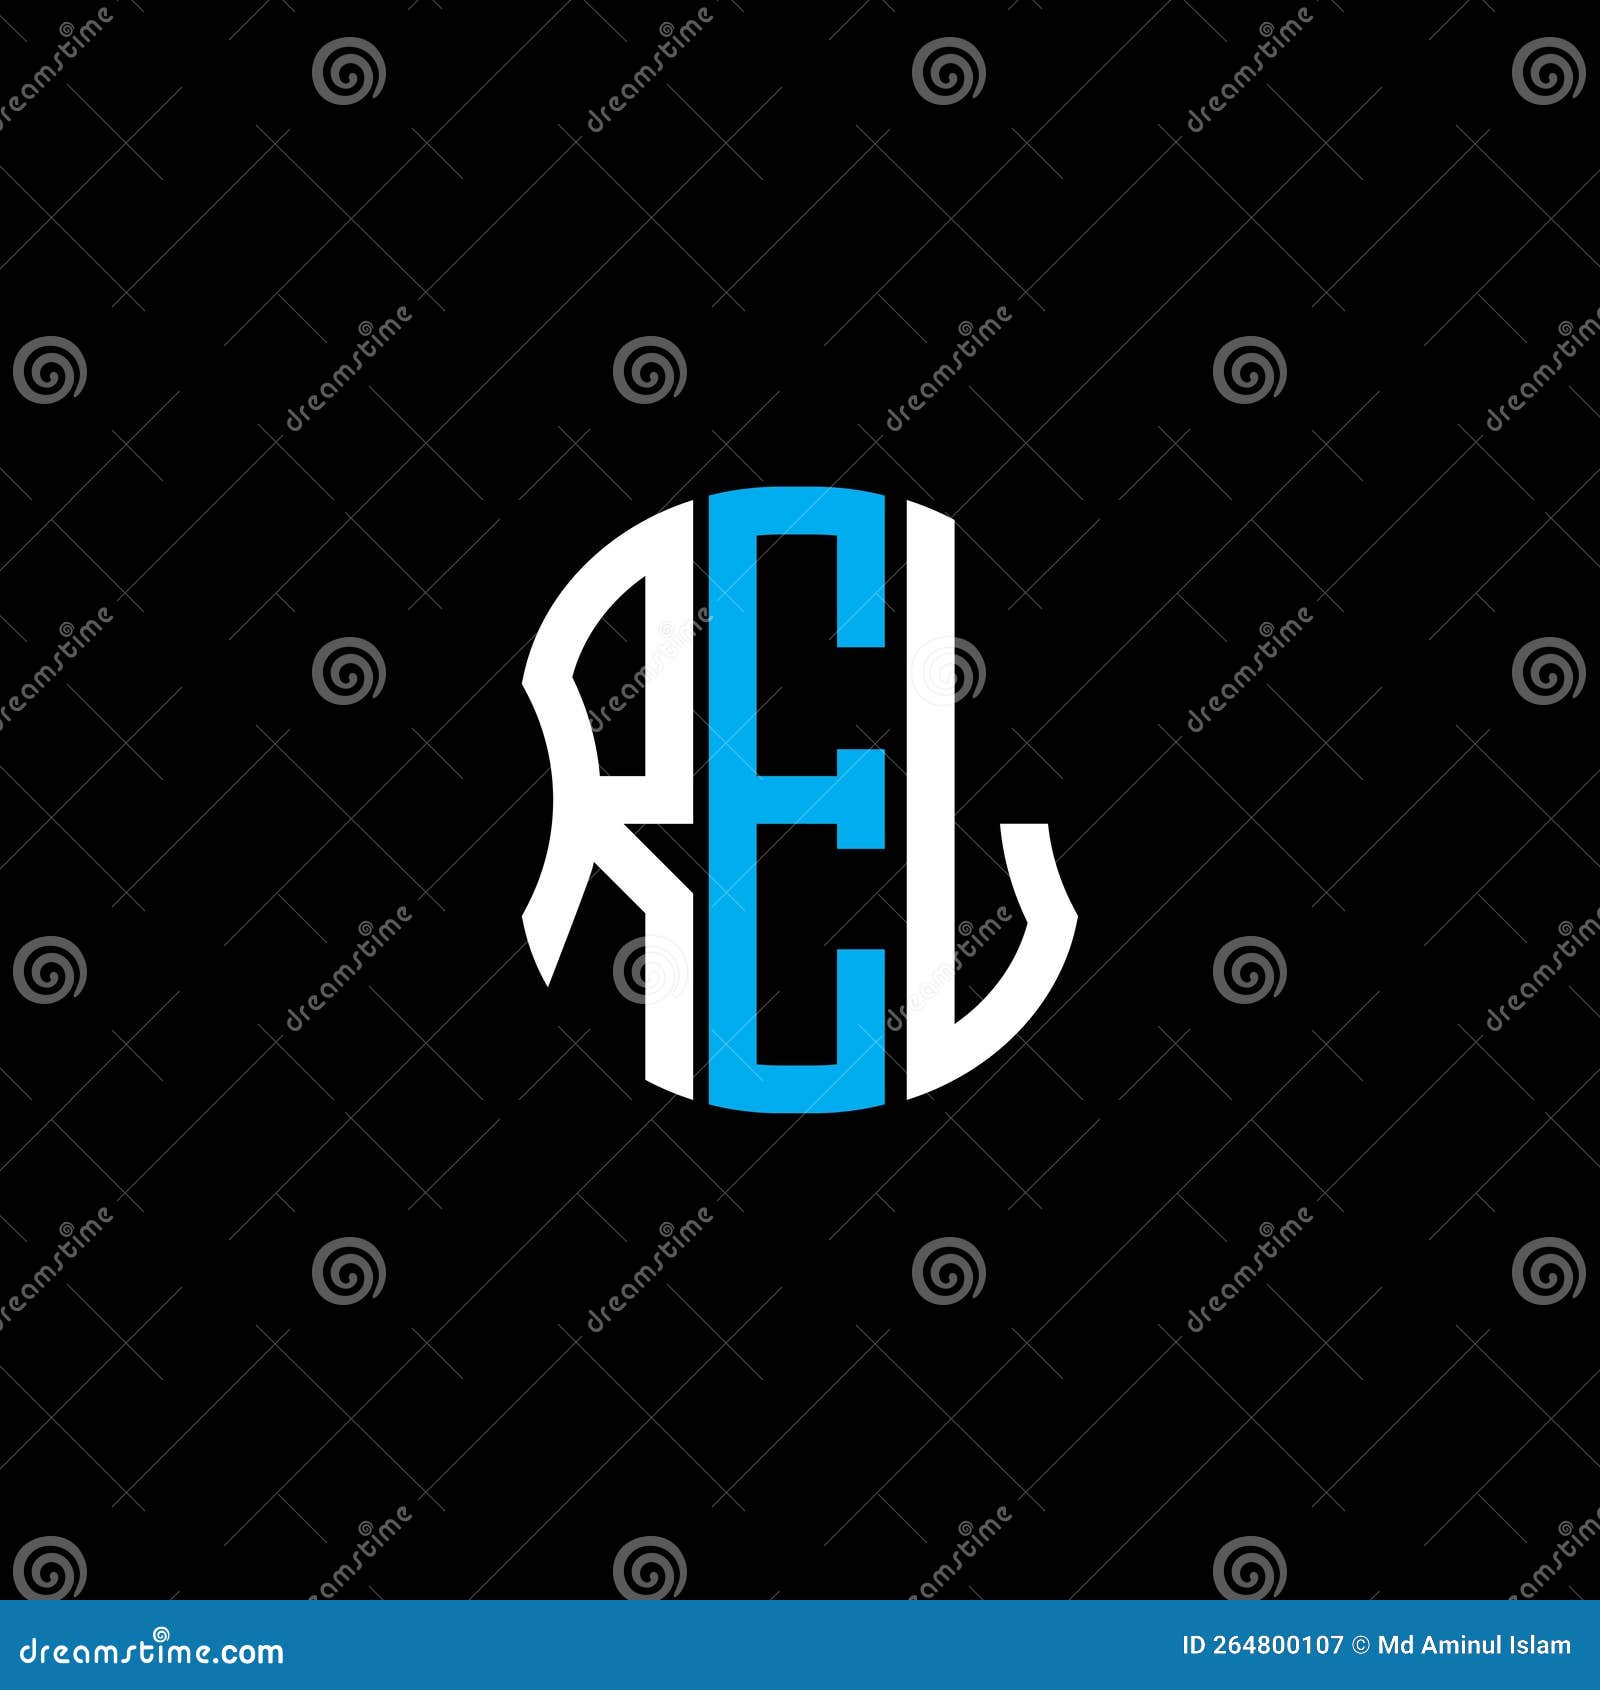 rel letter logo abstract creative .